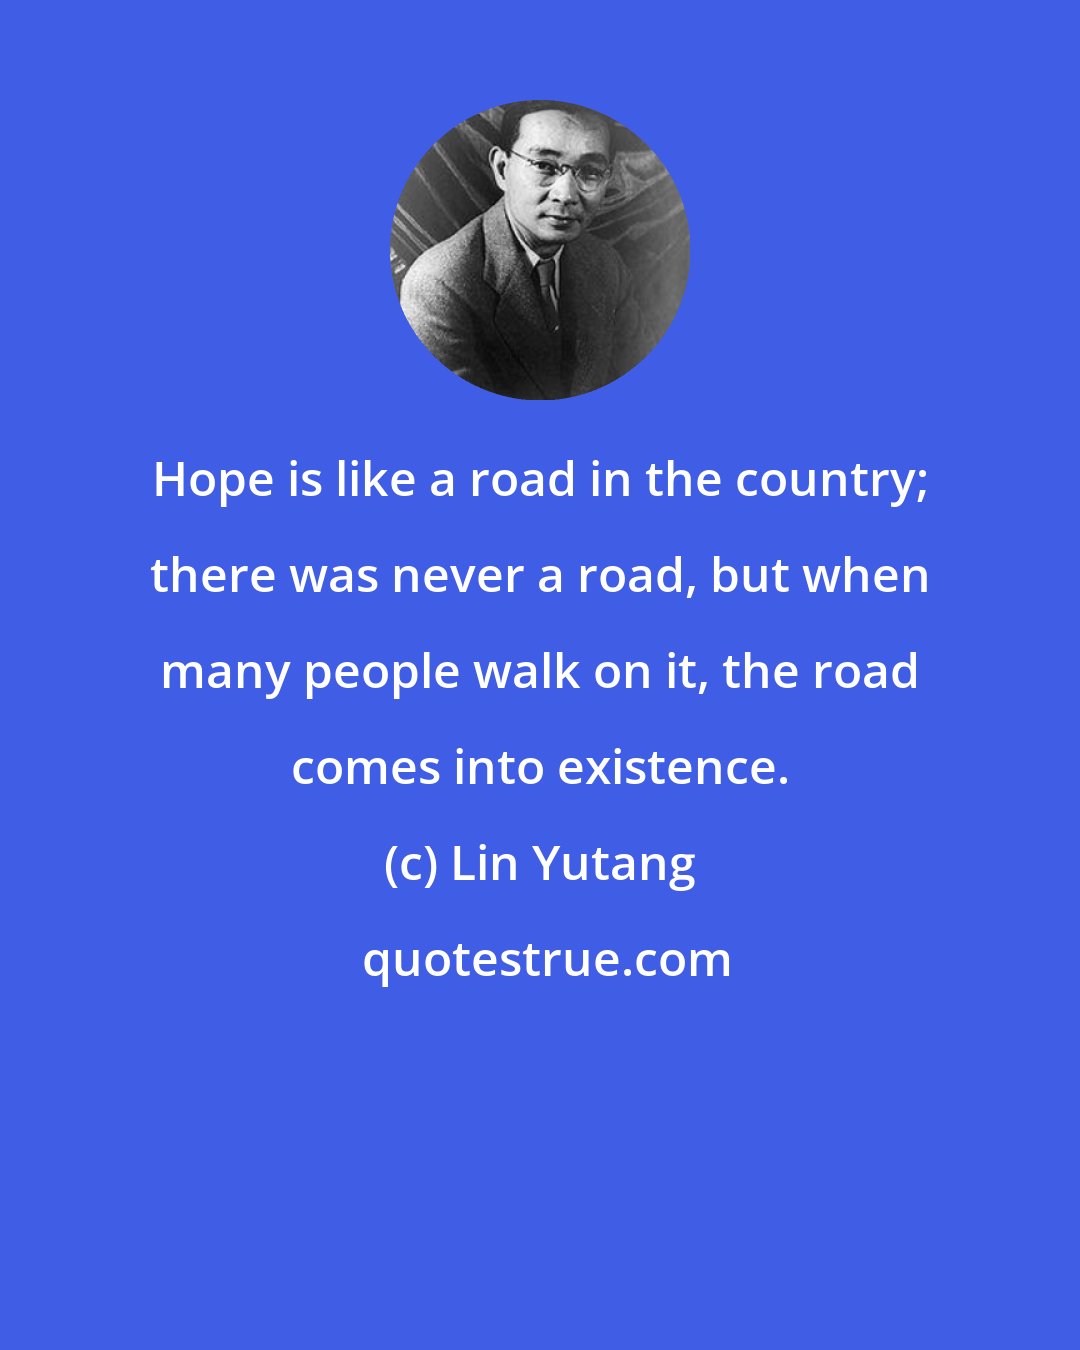 Lin Yutang: Hope is like a road in the country; there was never a road, but when many people walk on it, the road comes into existence.